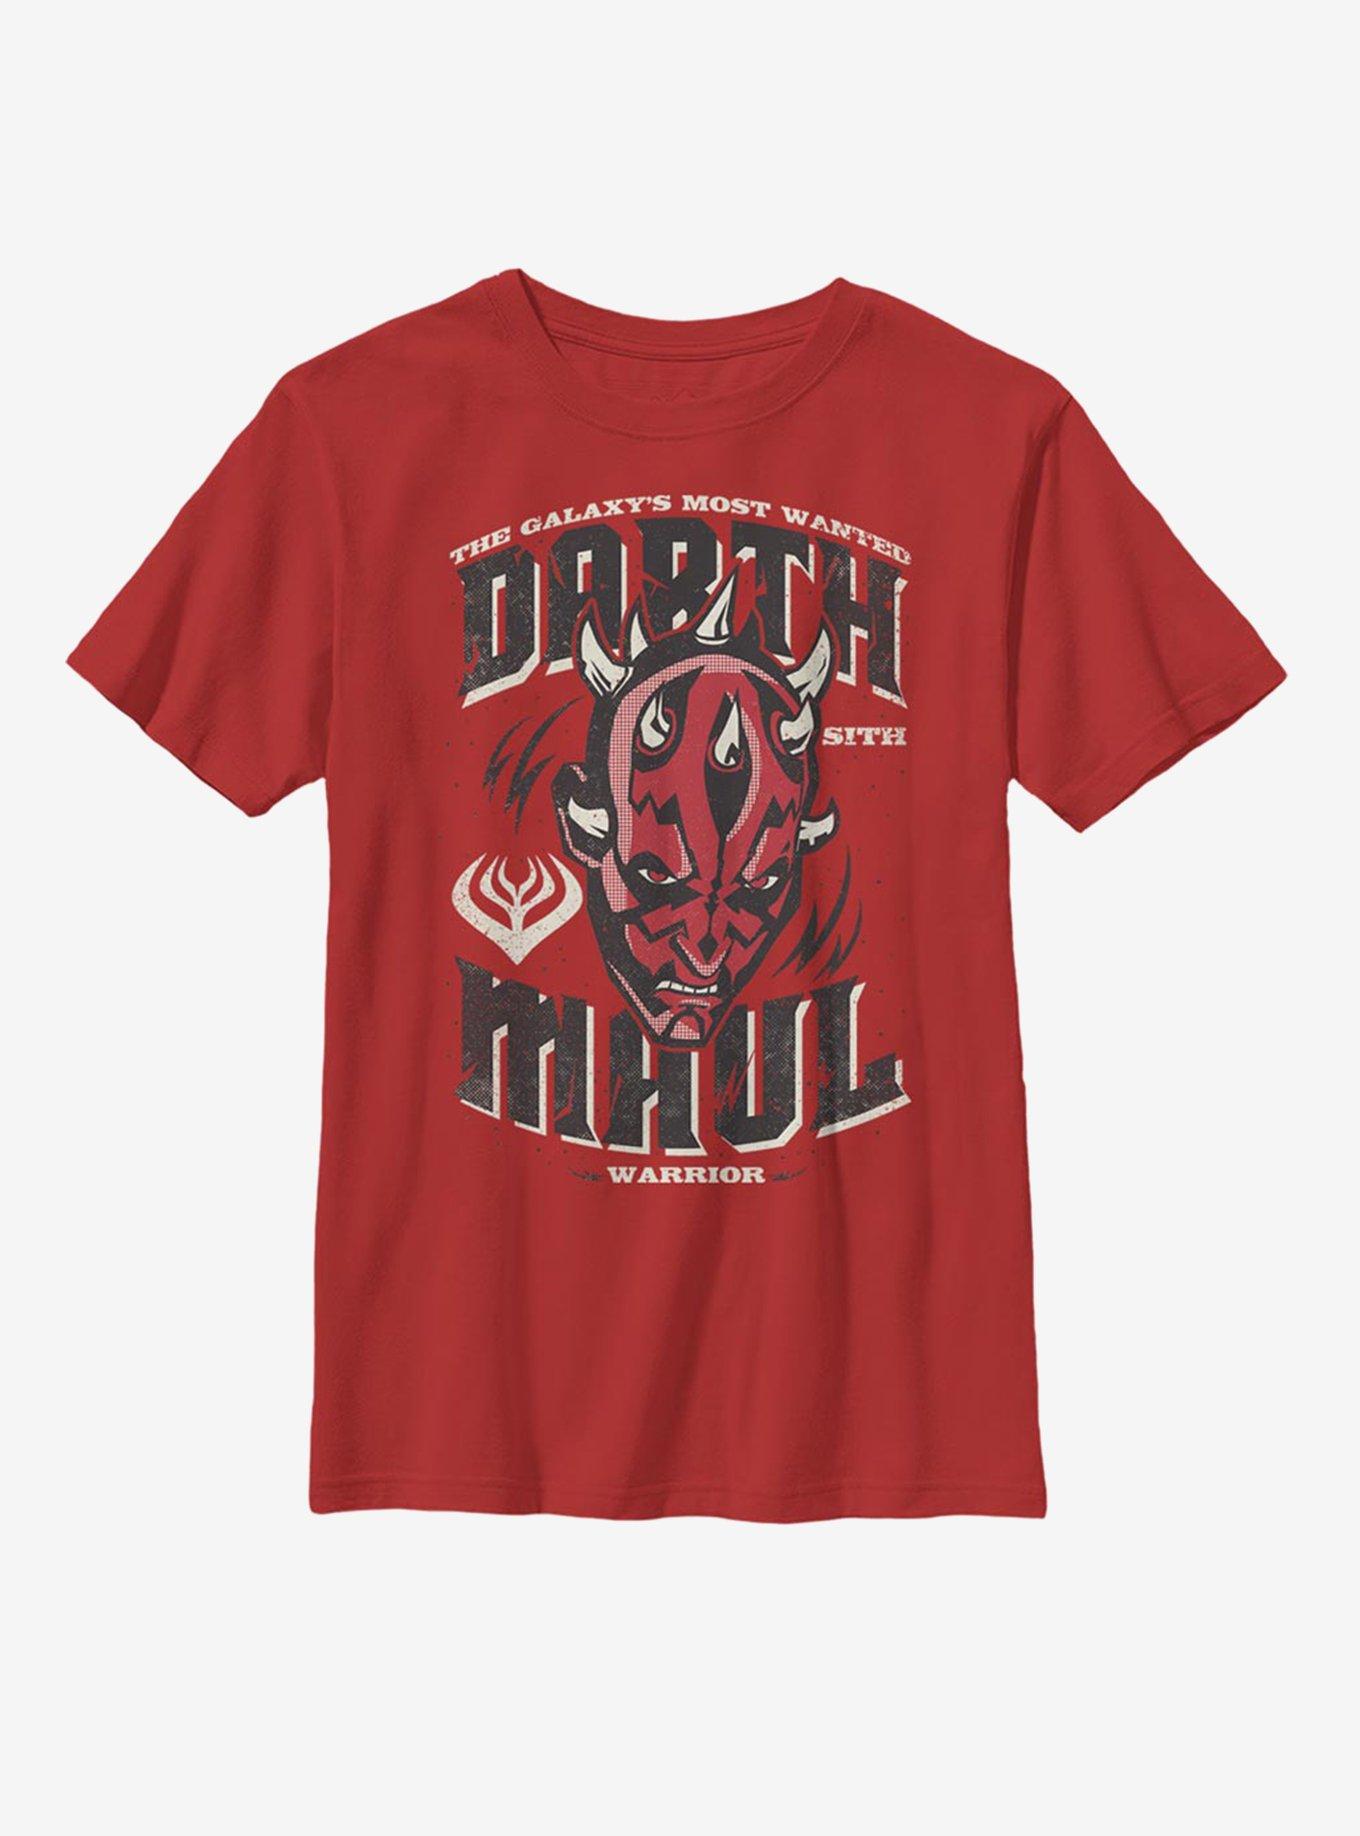 Star Wars: The Clone Wars Darth Maul Youth T-Shirt, RED, hi-res